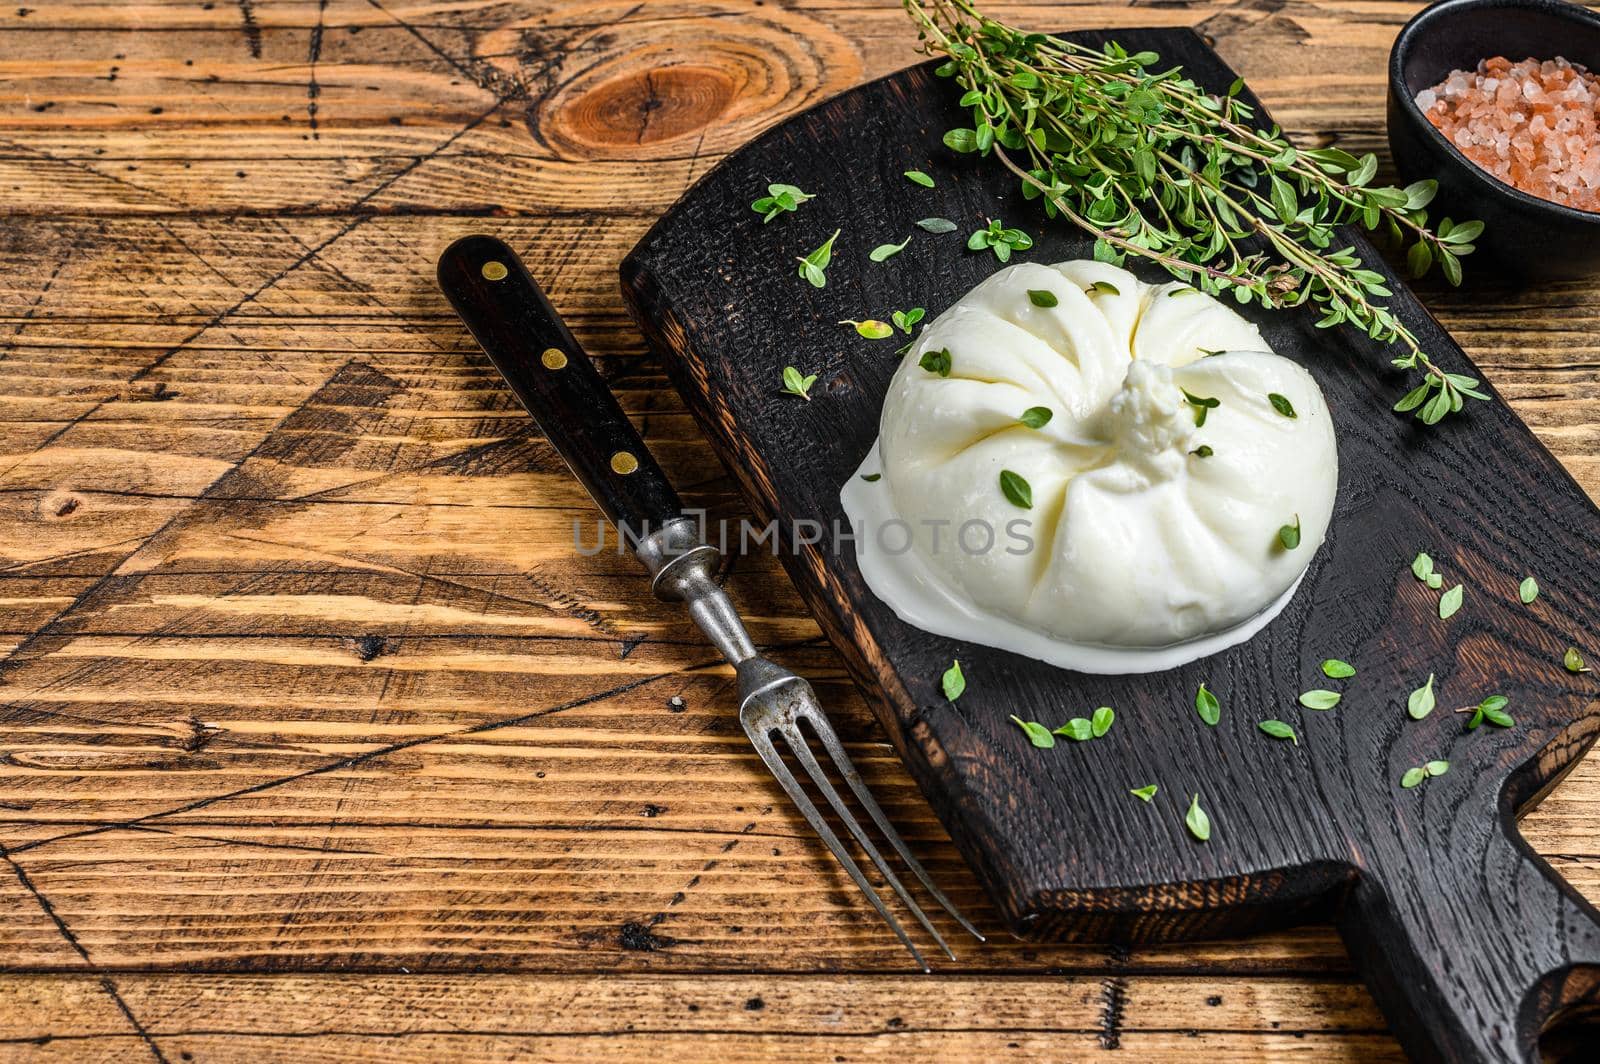 Cheese Burrata mozzarella on a wooden cutting board. wooden background. Top view. Copy space.